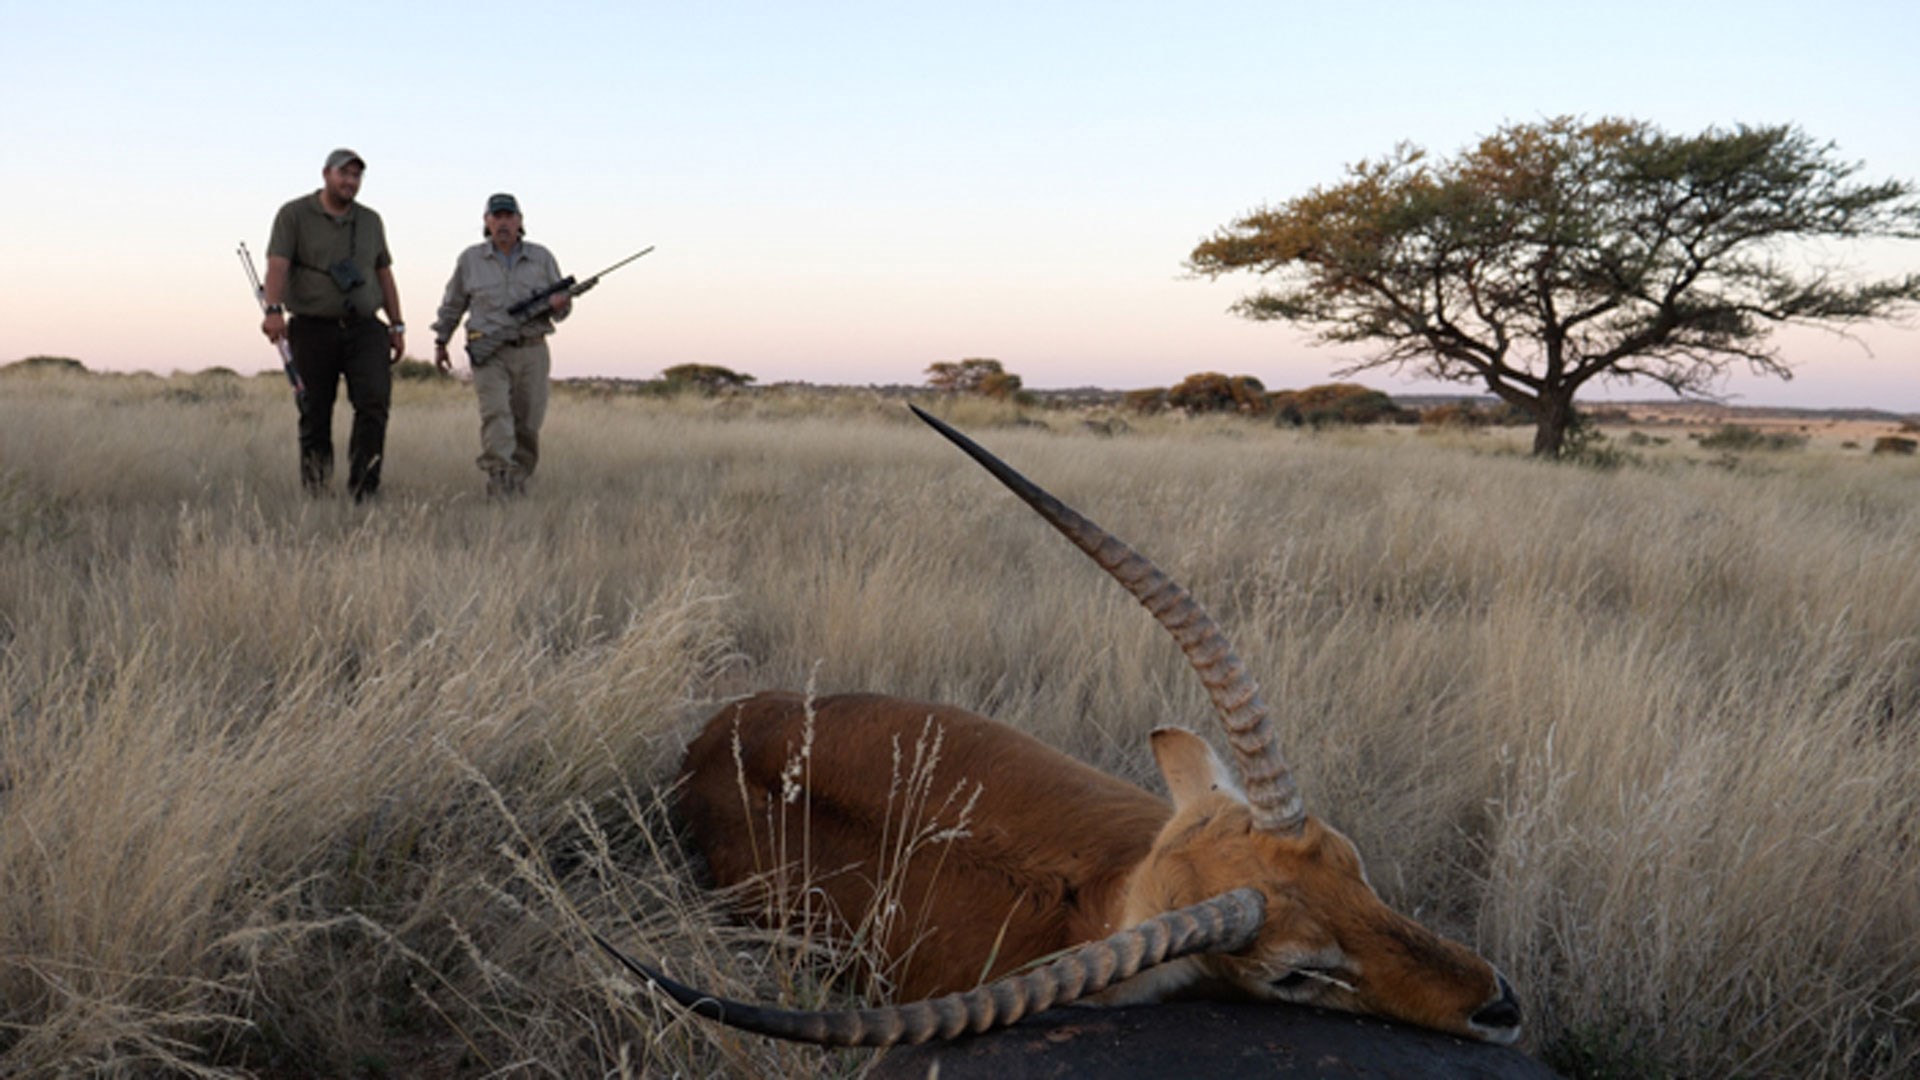 Downed animal being approached by hunters